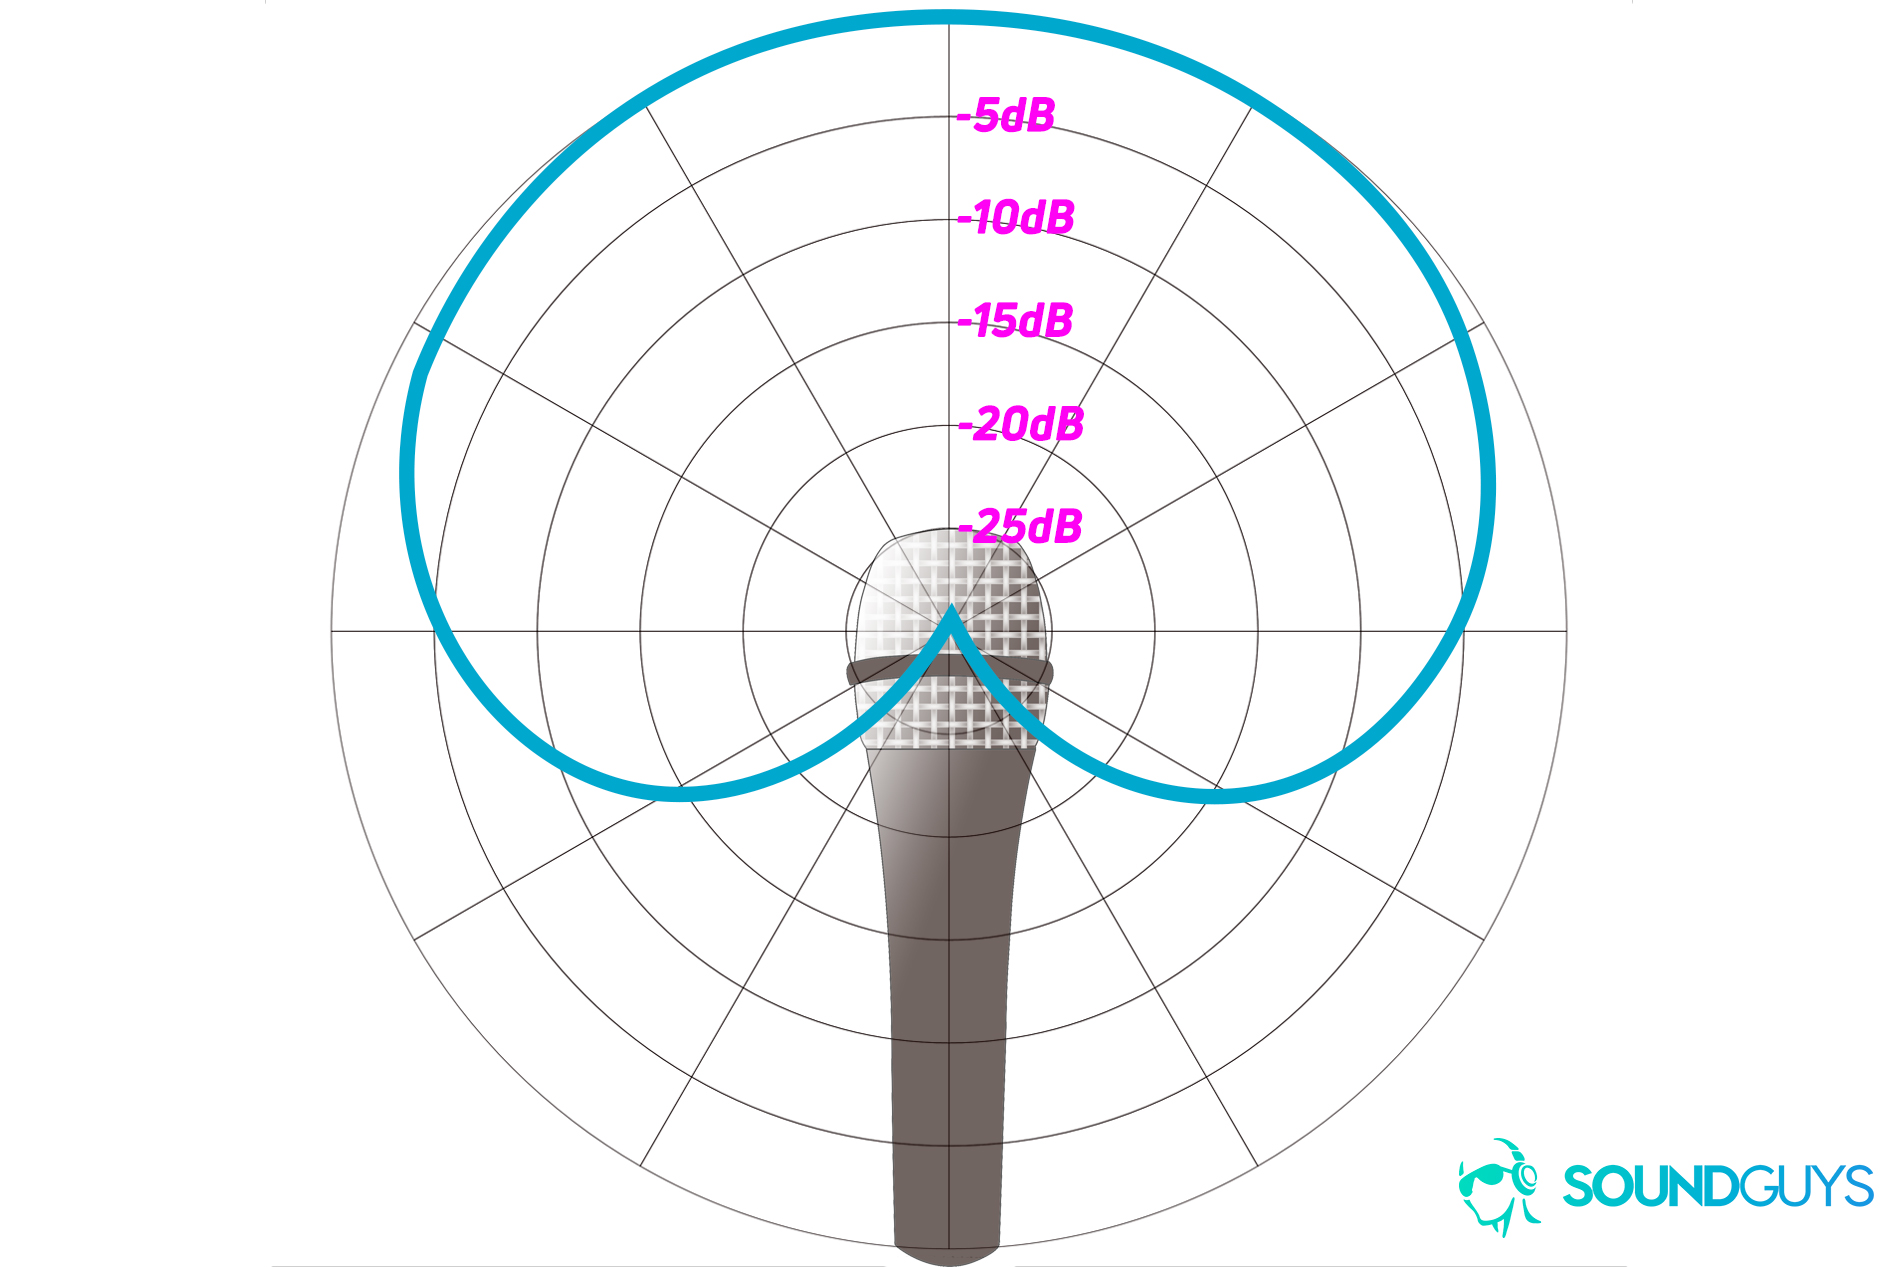 Blue Ember - An example of a polar chart detailing the pickup pattern of a cardioid microphone